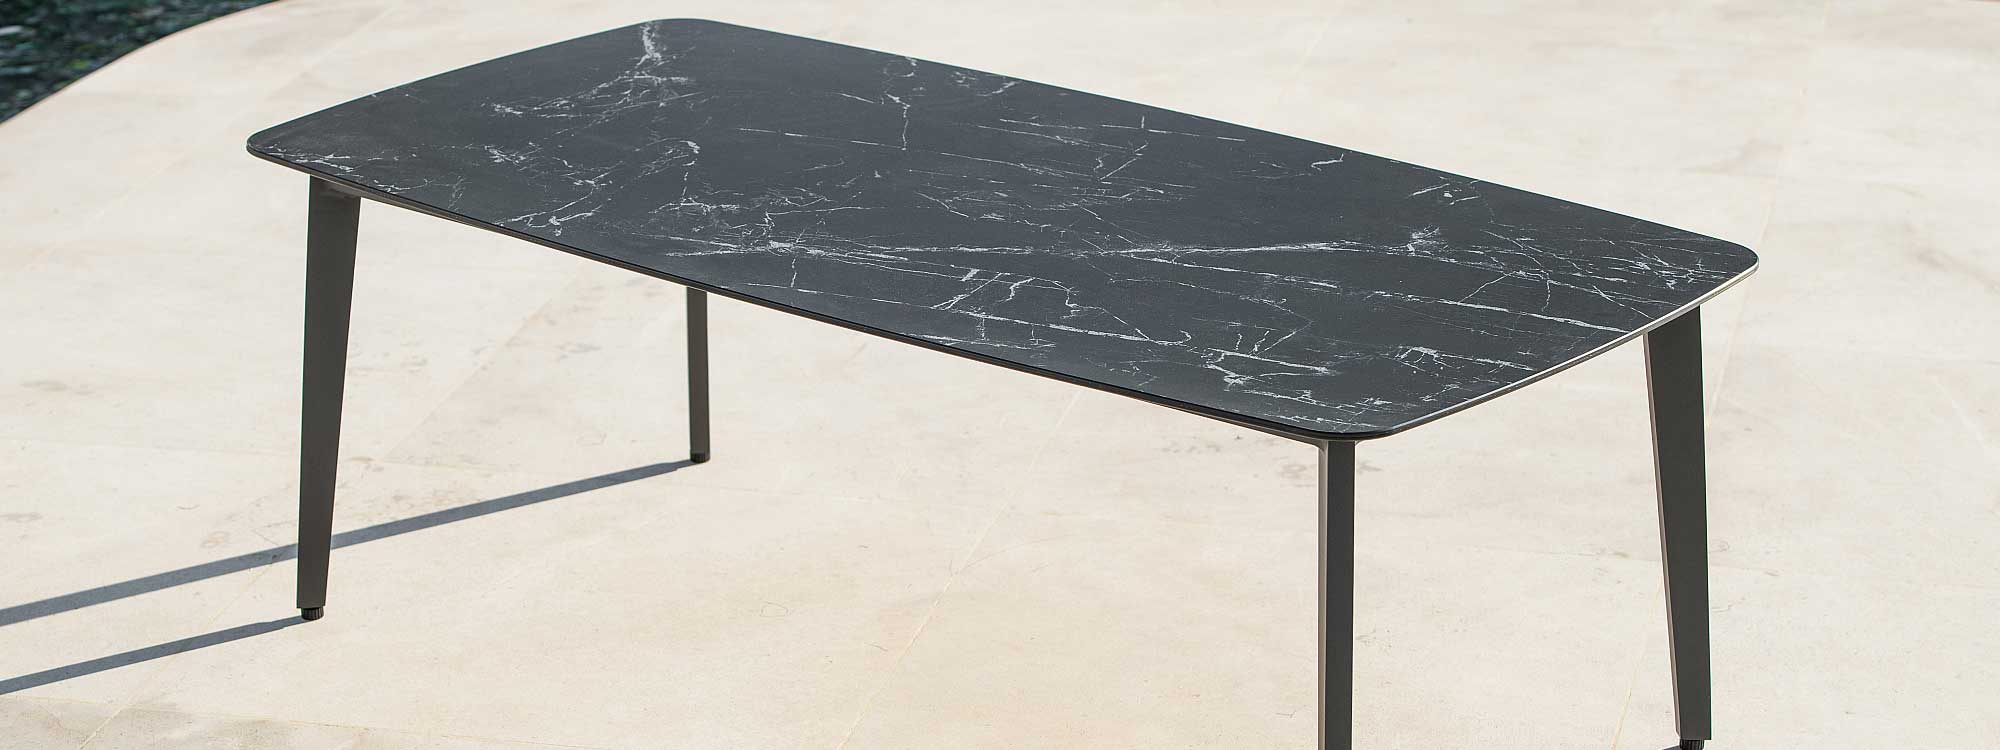 Image of Ritz black garden dining table with dark marble ceramic table top by Jati & Kebon